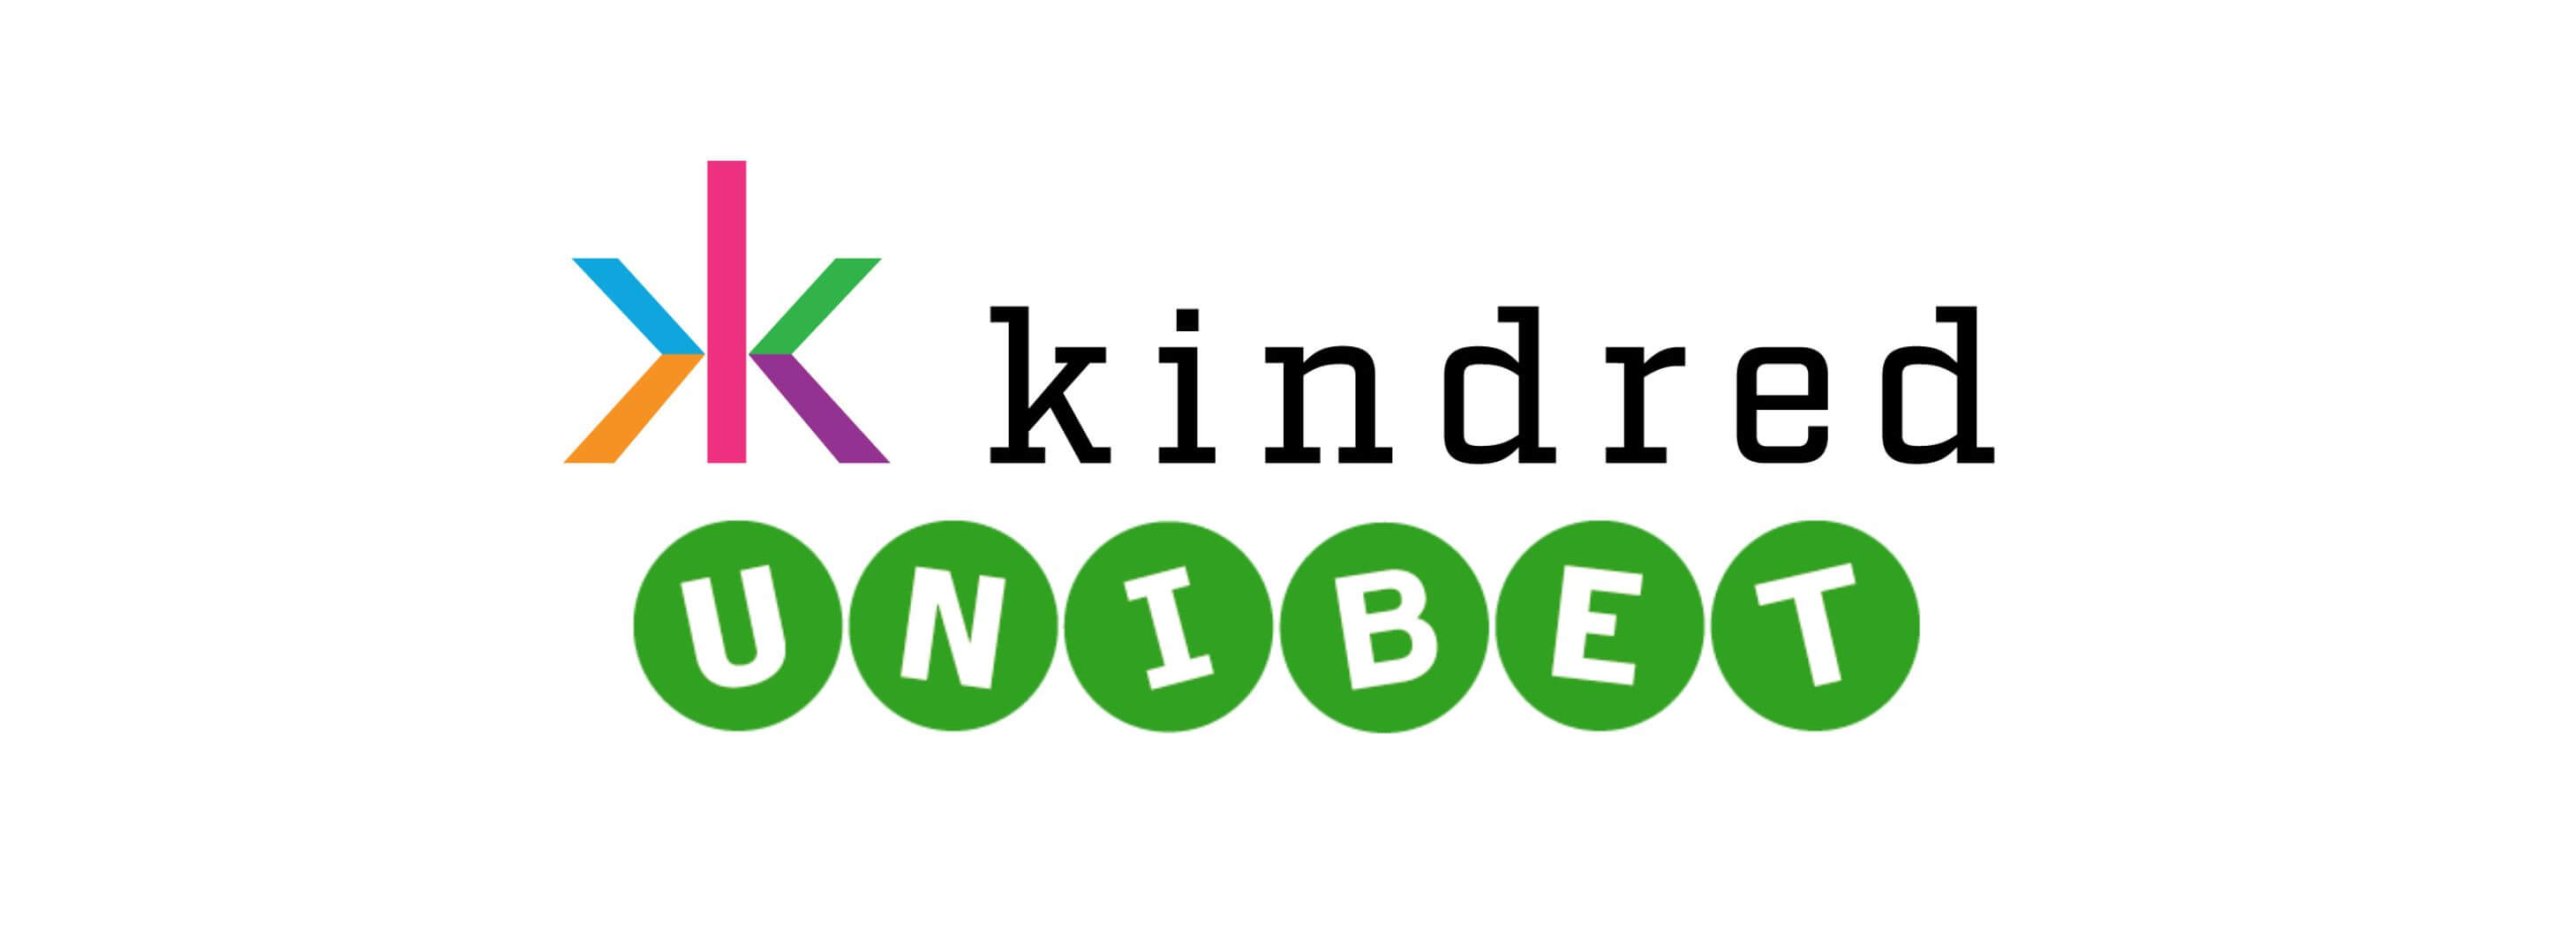 Kindred Group evaluates potential sale of Unibet